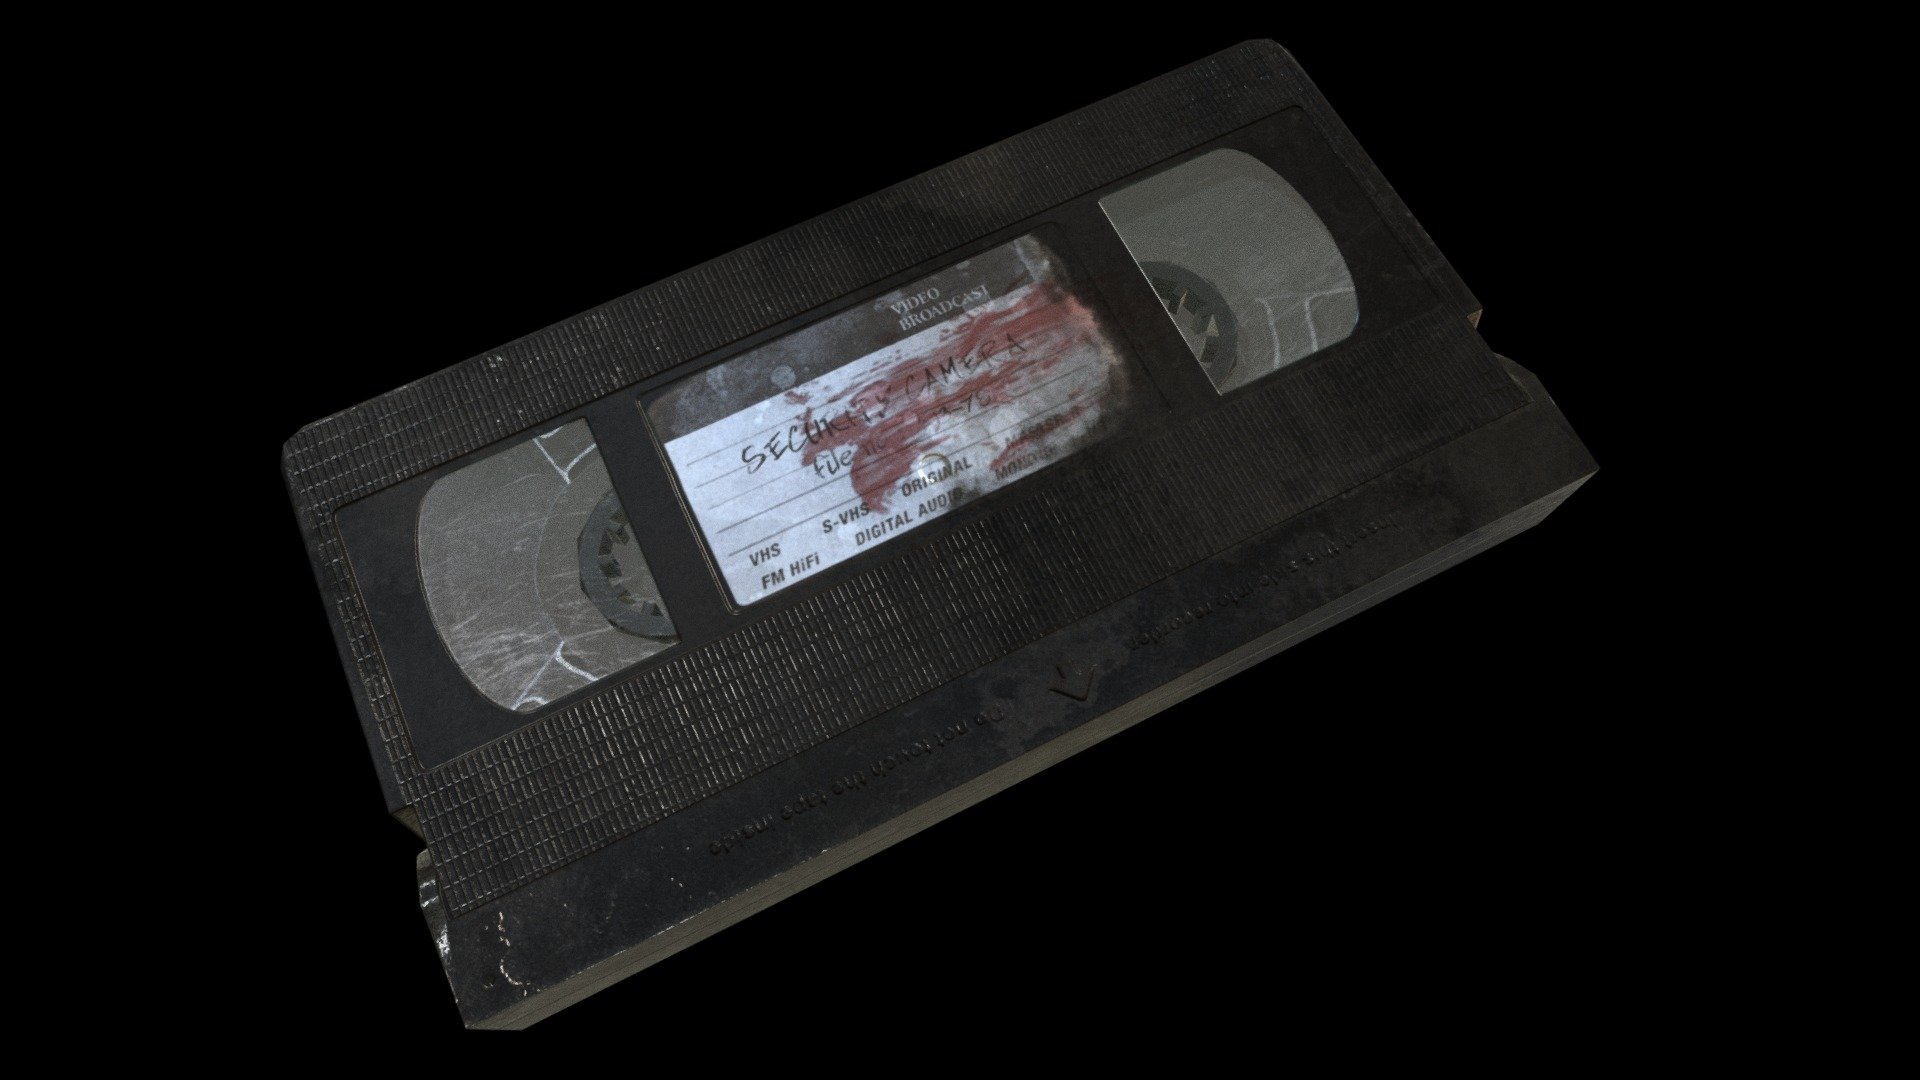 There is a PBR textured VHS Cassette you can use as Weapon or environment object, research, Urban Criminal games of found based games.

660 POLY

For Texture maps ; Pbr Maps Contains

4096 x 4096 Diffuse TGA 4096 x 4096 normal TGA 4096 x 4096 ao map TGA 4096 x 4096 specular TGA 4096 x 4096 Metalness TGA 4096 x 4096 Opacity TGA - VHS Casette - 3D model by Reberu Games (@ReberuGames) 3d model